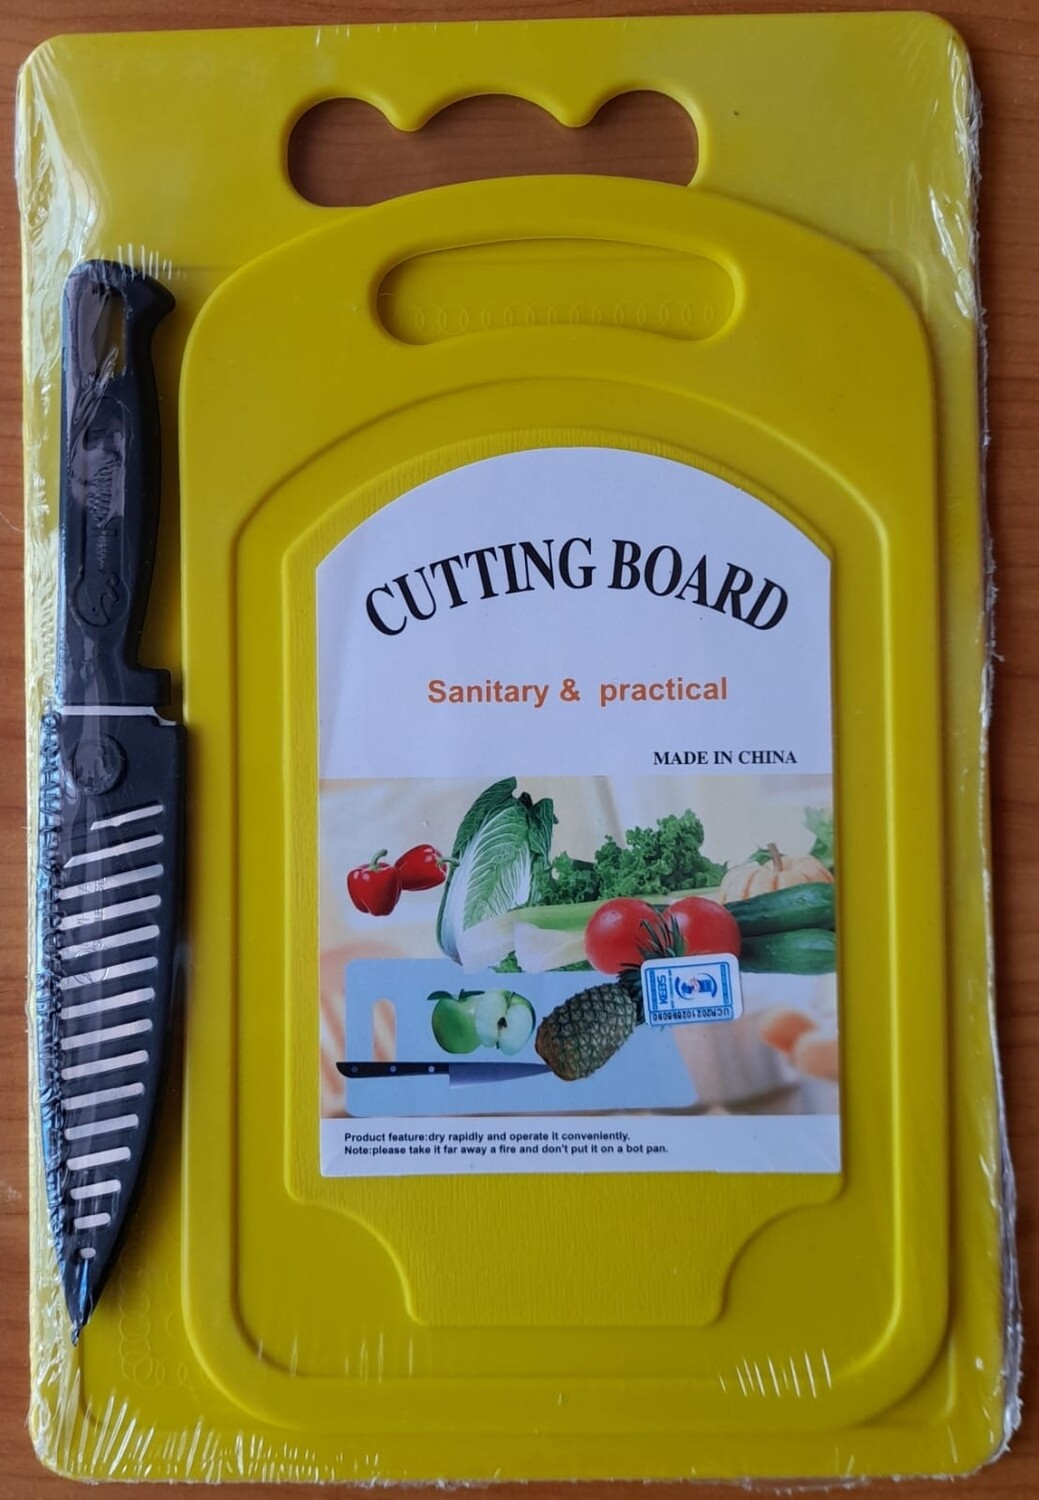 Kitchen Accessories 3PCS Chopping Board Set (#115721) - Versatile and Essential Kitchen Tools